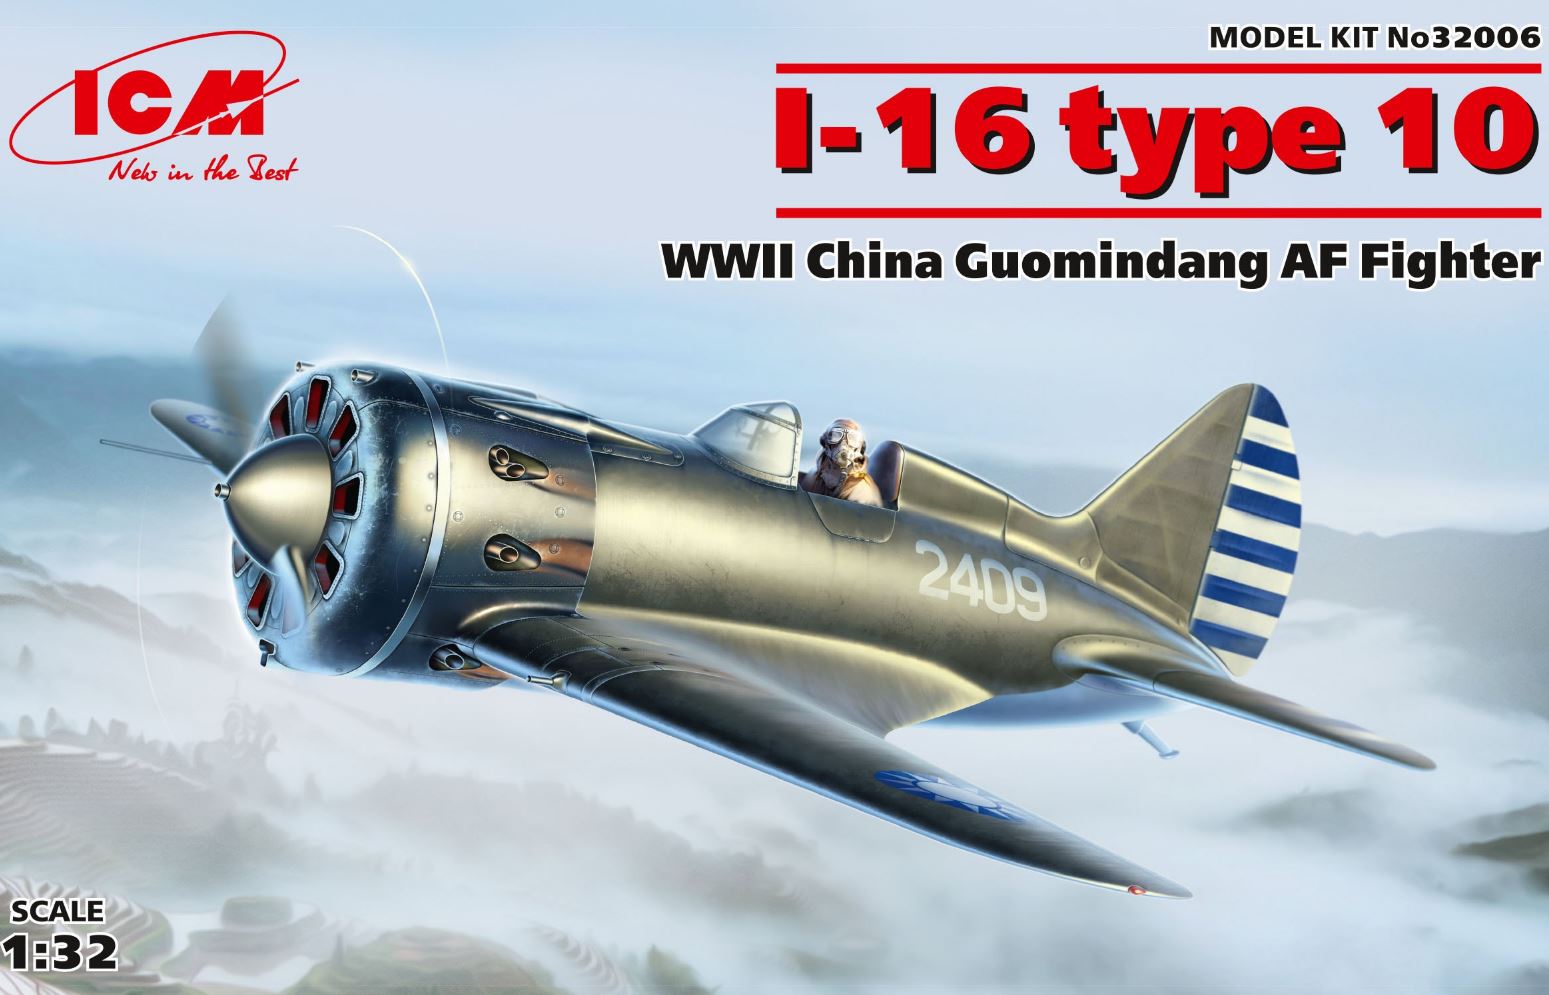 32006  авиация  И-16 тип 10, WWII China Guomindang AF Fighter  (1:32)